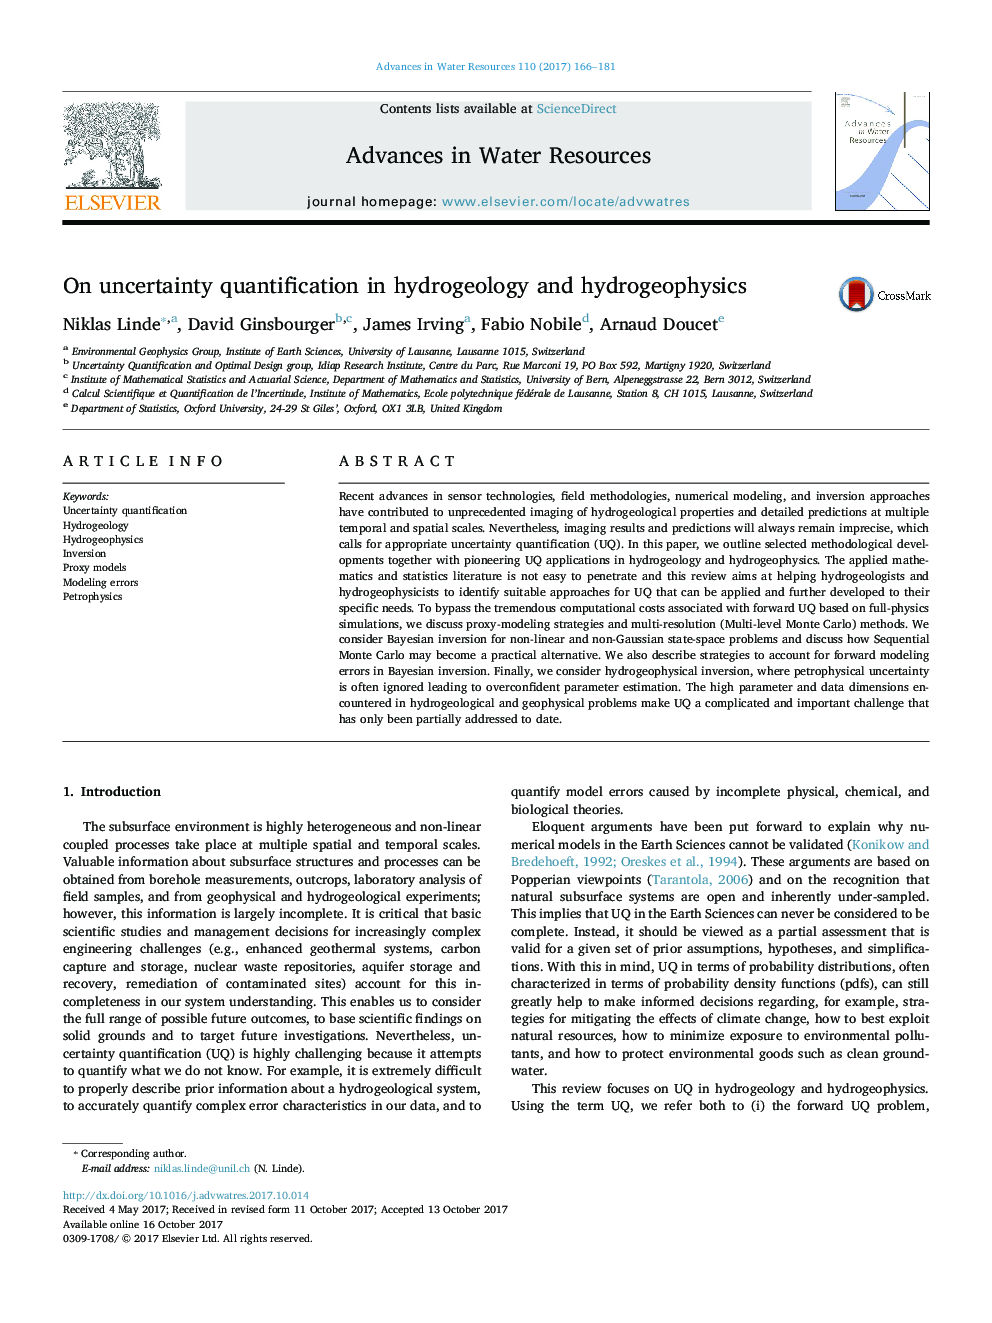 On uncertainty quantification in hydrogeology and hydrogeophysics